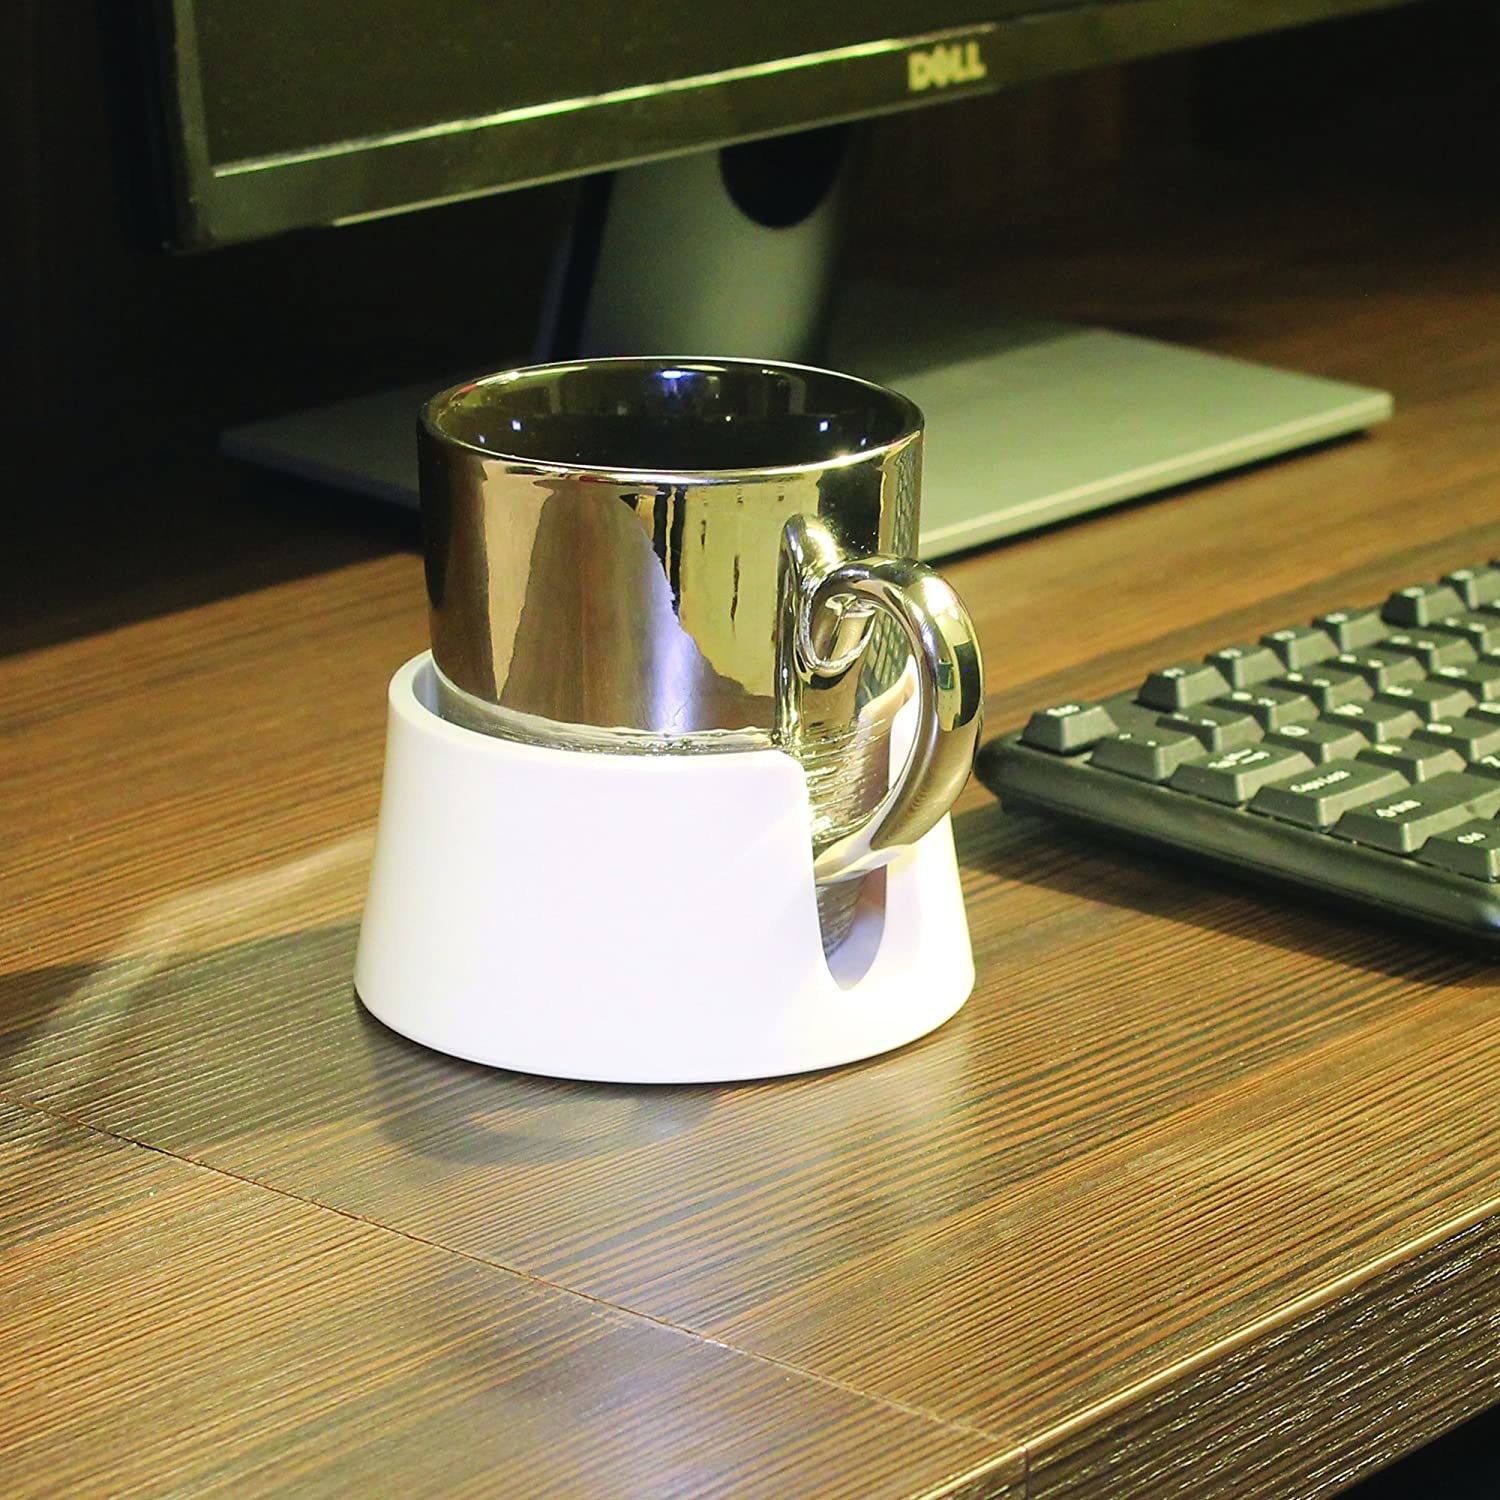 The holder with a mug in it on a desk